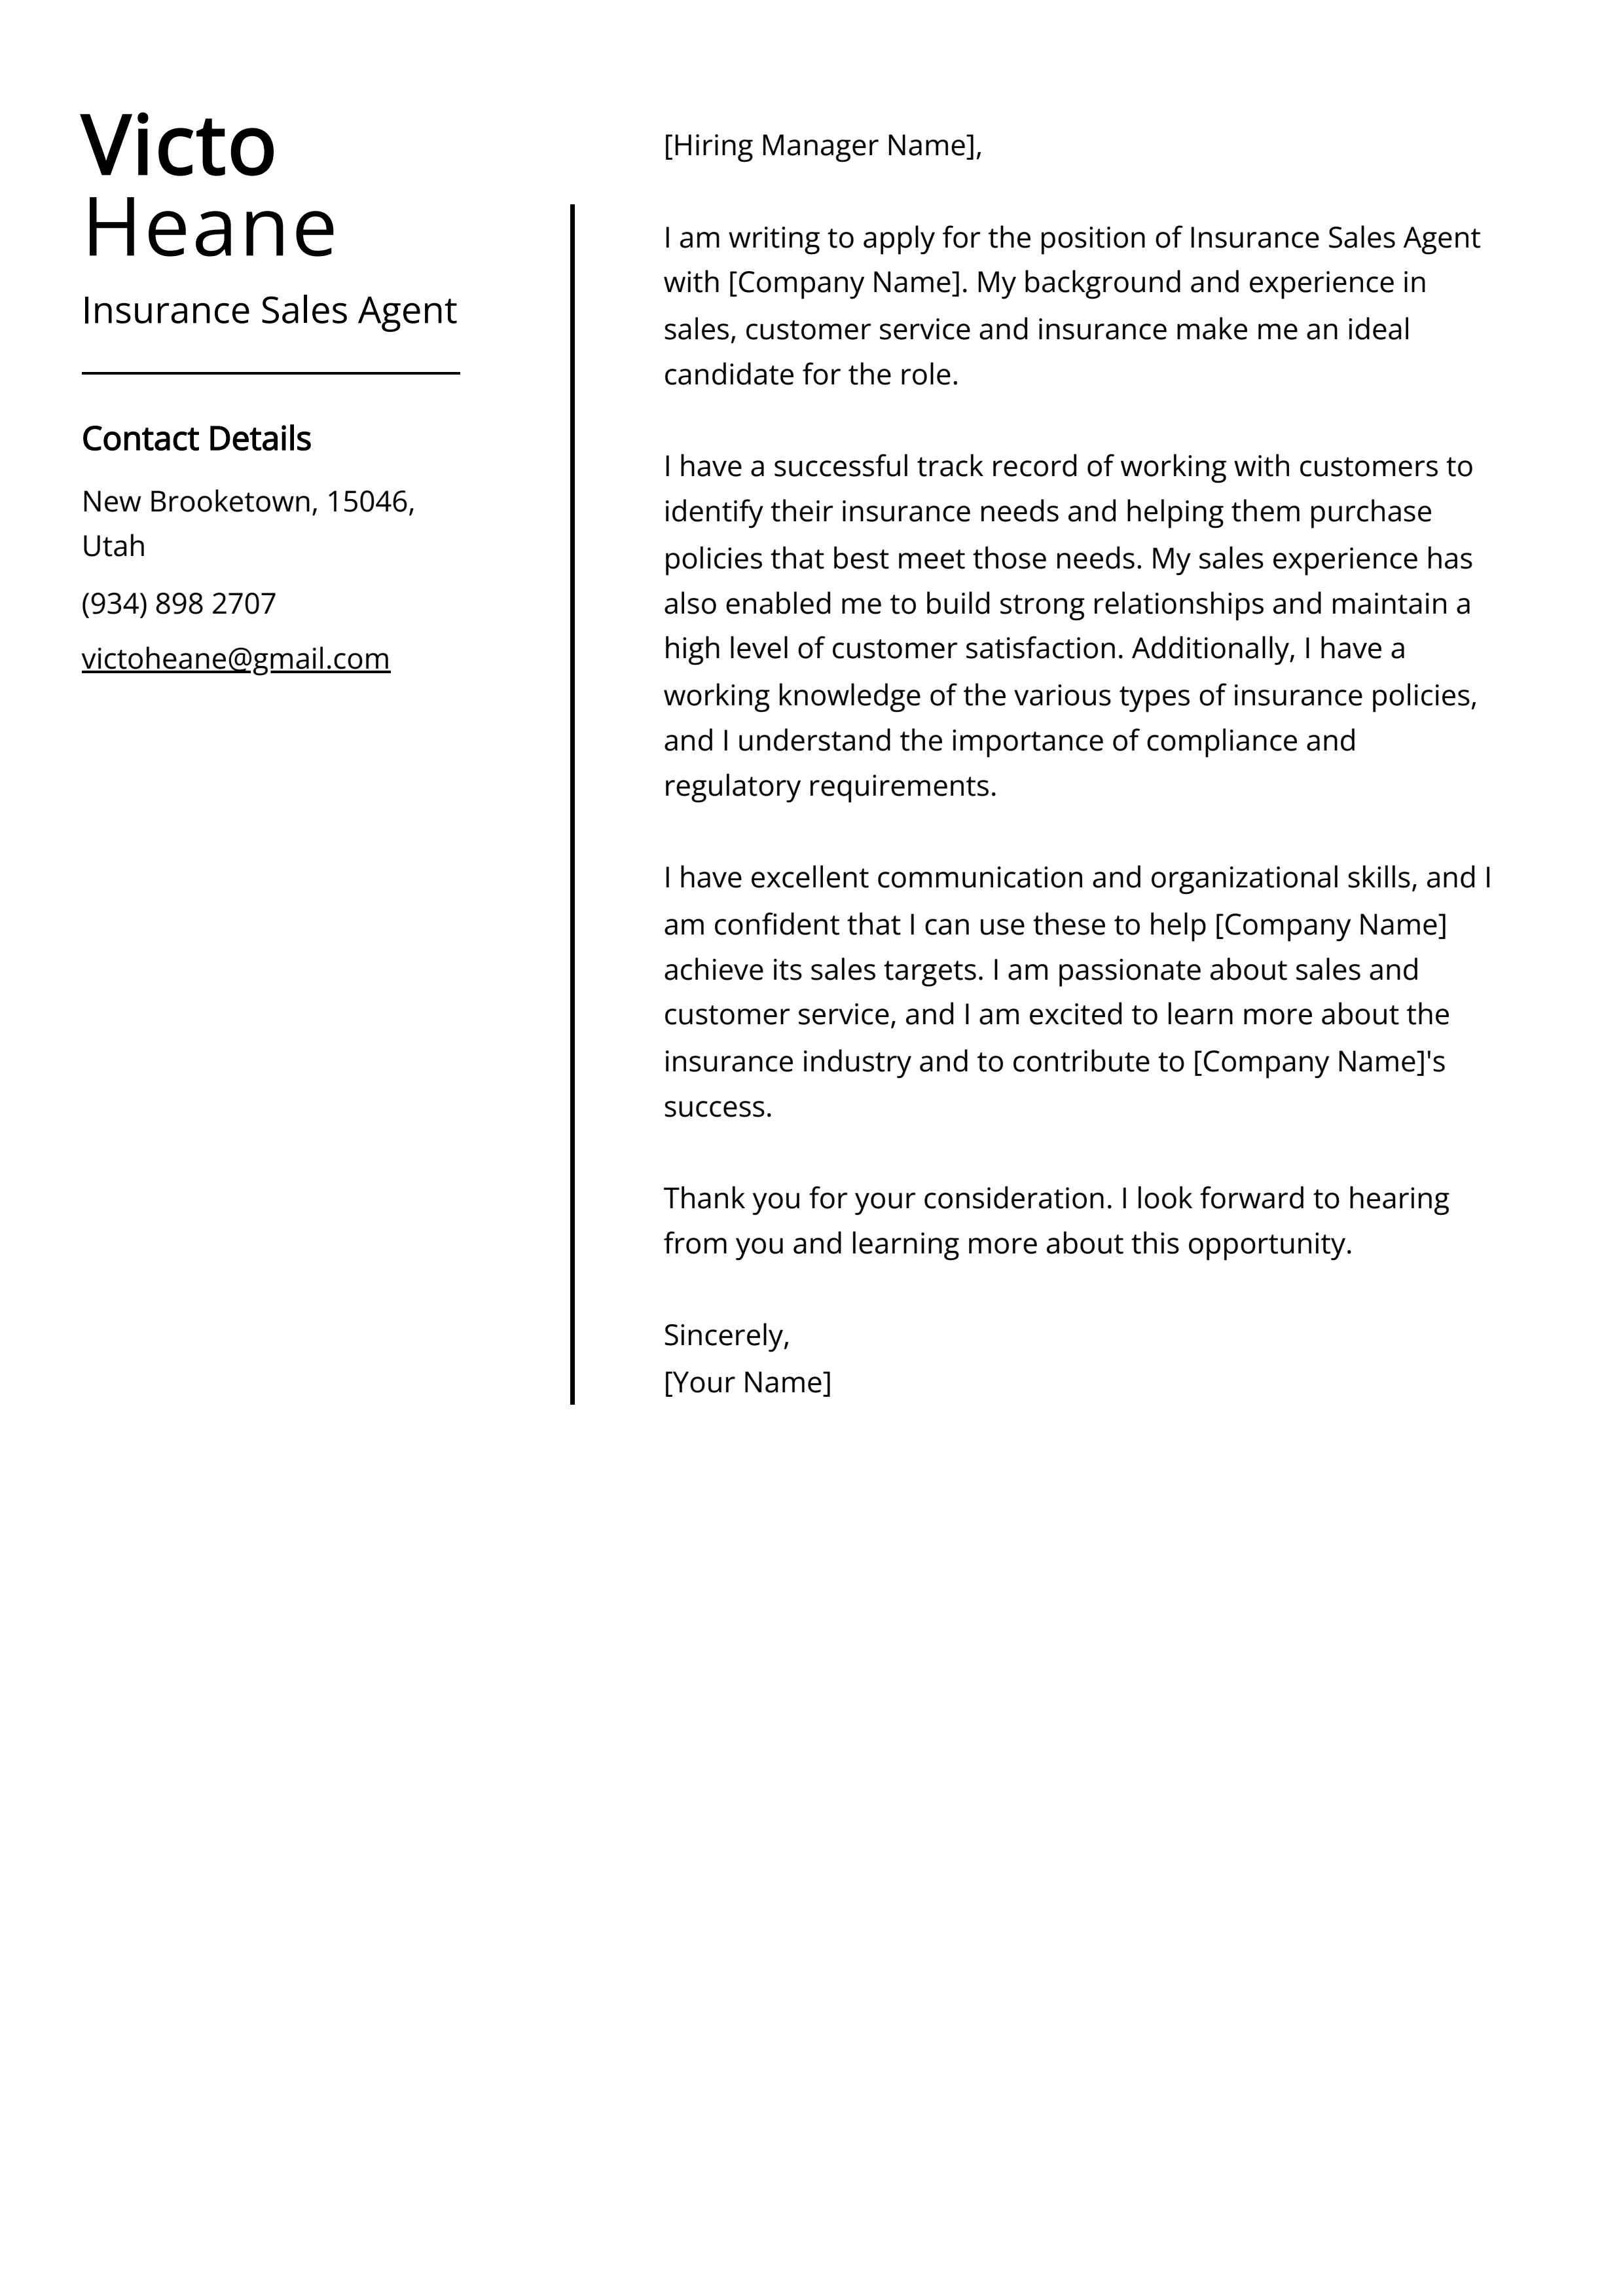 Insurance Sales Agent Cover Letter Example